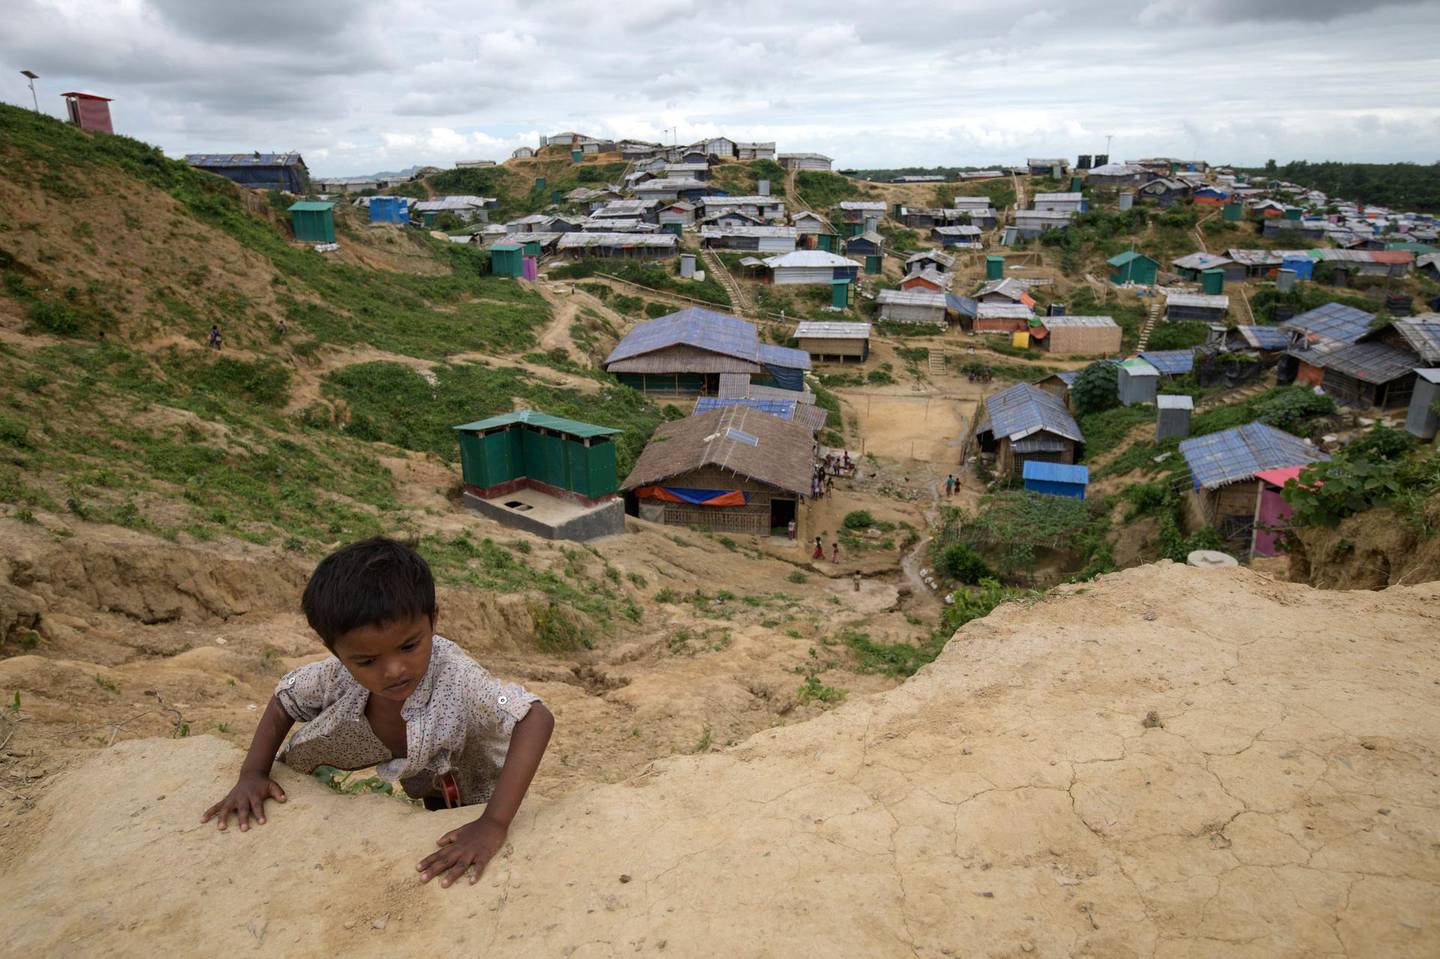 A Rohingya refugee child climbs a slope at the Jamtoli refugee camp near Cox's Bazar on August 12, 2018. / AFP PHOTO / Ed JONES